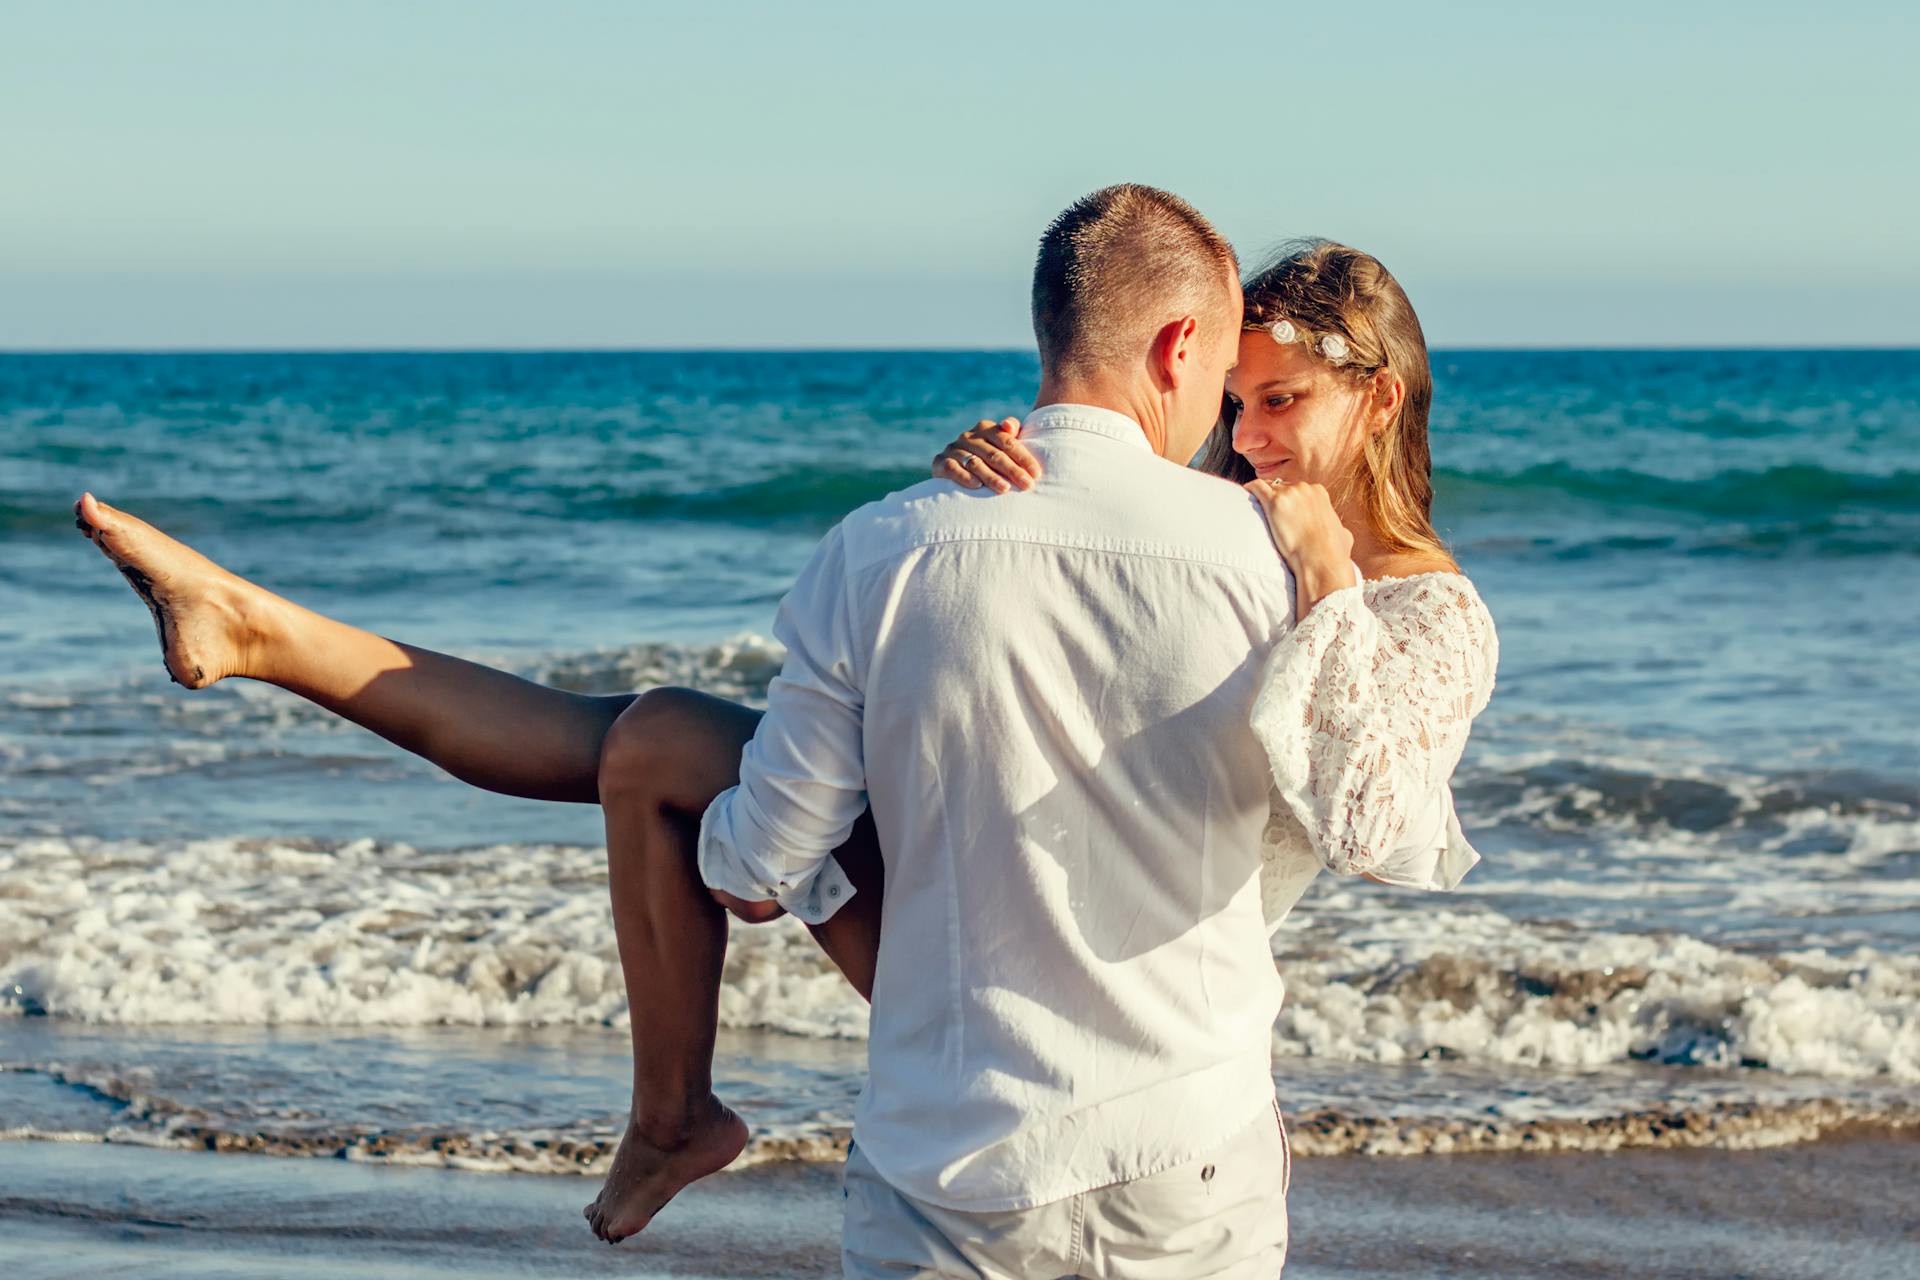 A couple on the beach | Source: Pexels